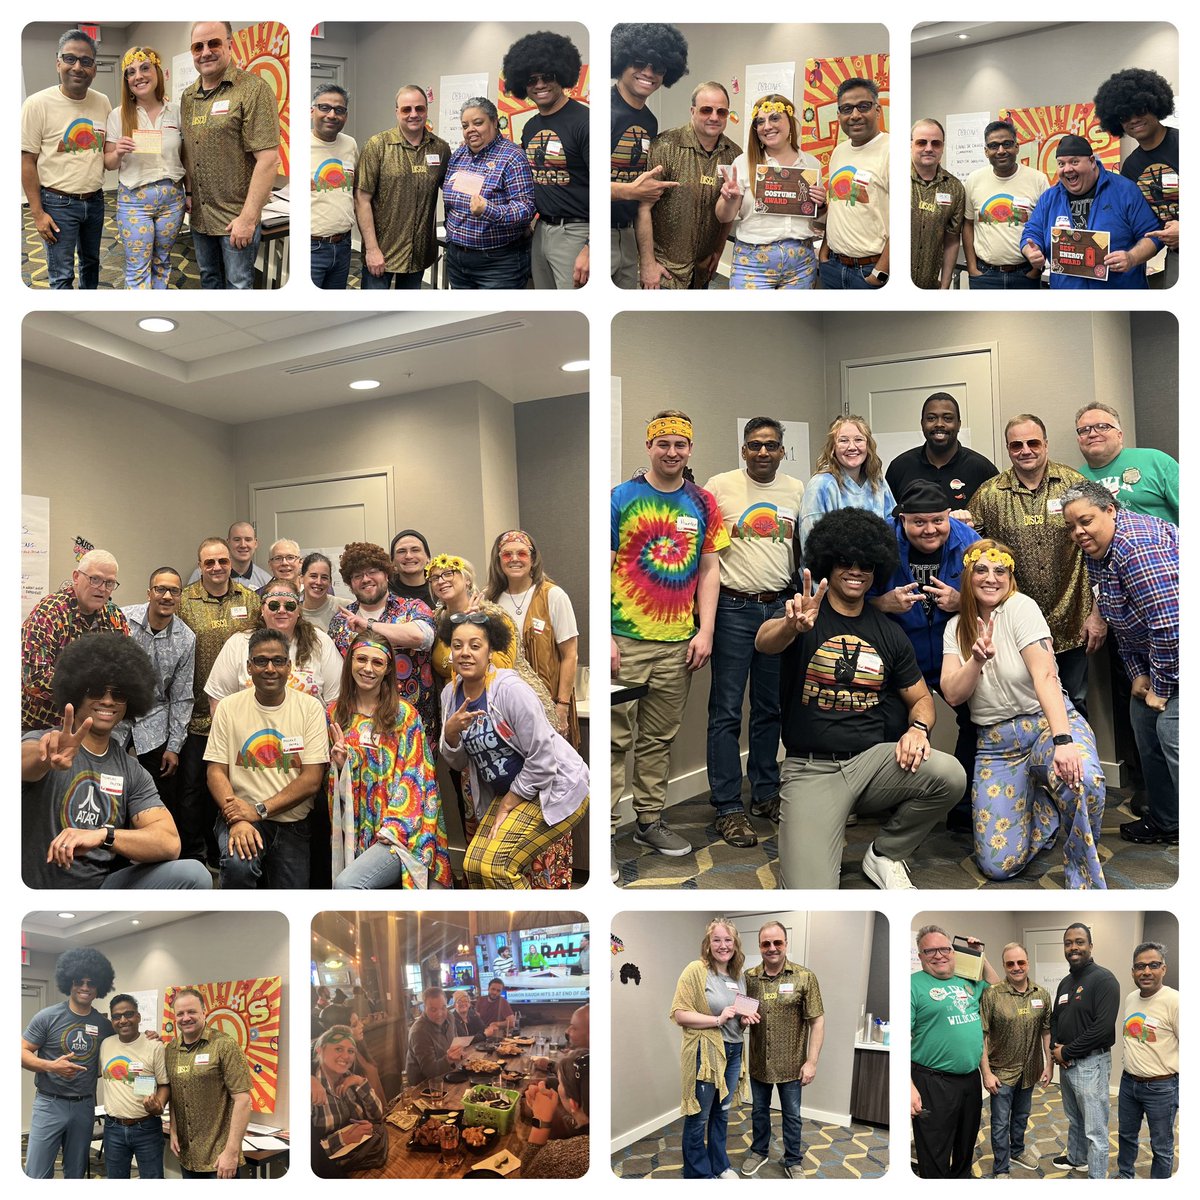 Minnesota was outstanding! Town Halls, Restaurant visits and GM connections!!! Amazing group of leaders that are driving the business forward 🙌🏽#MidwestIsTheBest @dougcomings @train3rgirl @BKaltved @aLee1529 @LynAj4